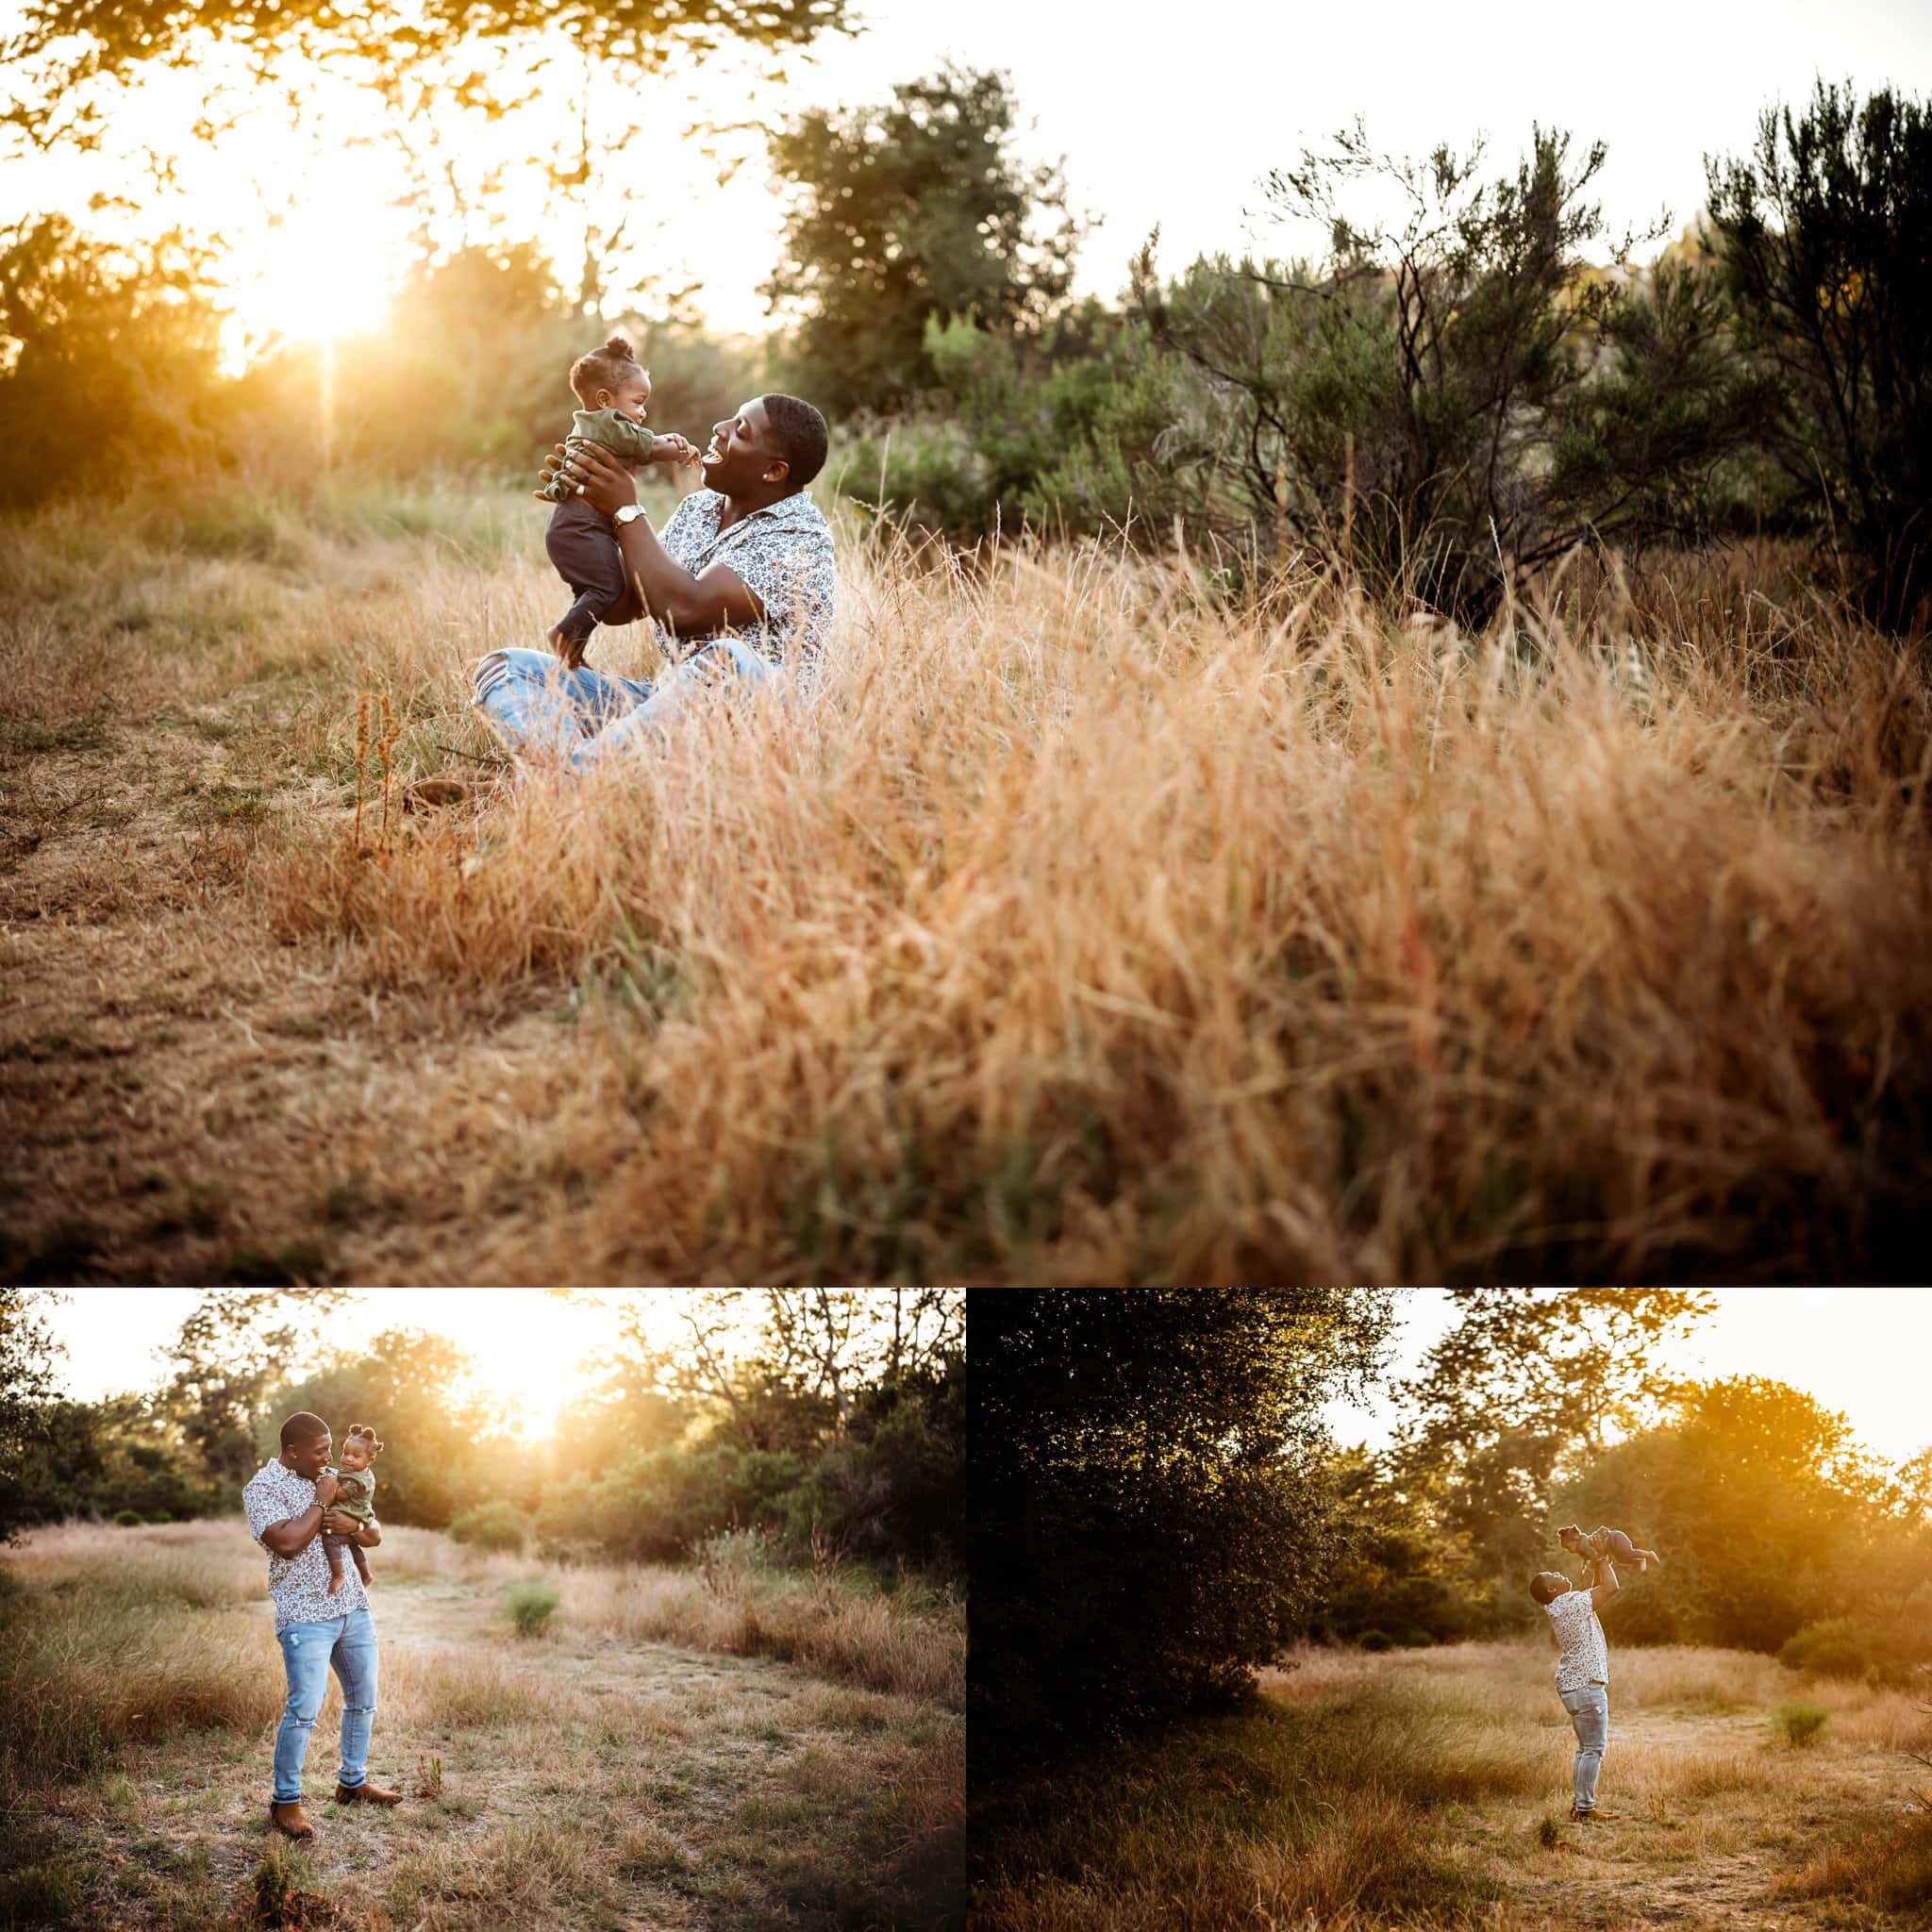 Father and 8 month old baby girl play together in a field with golden light